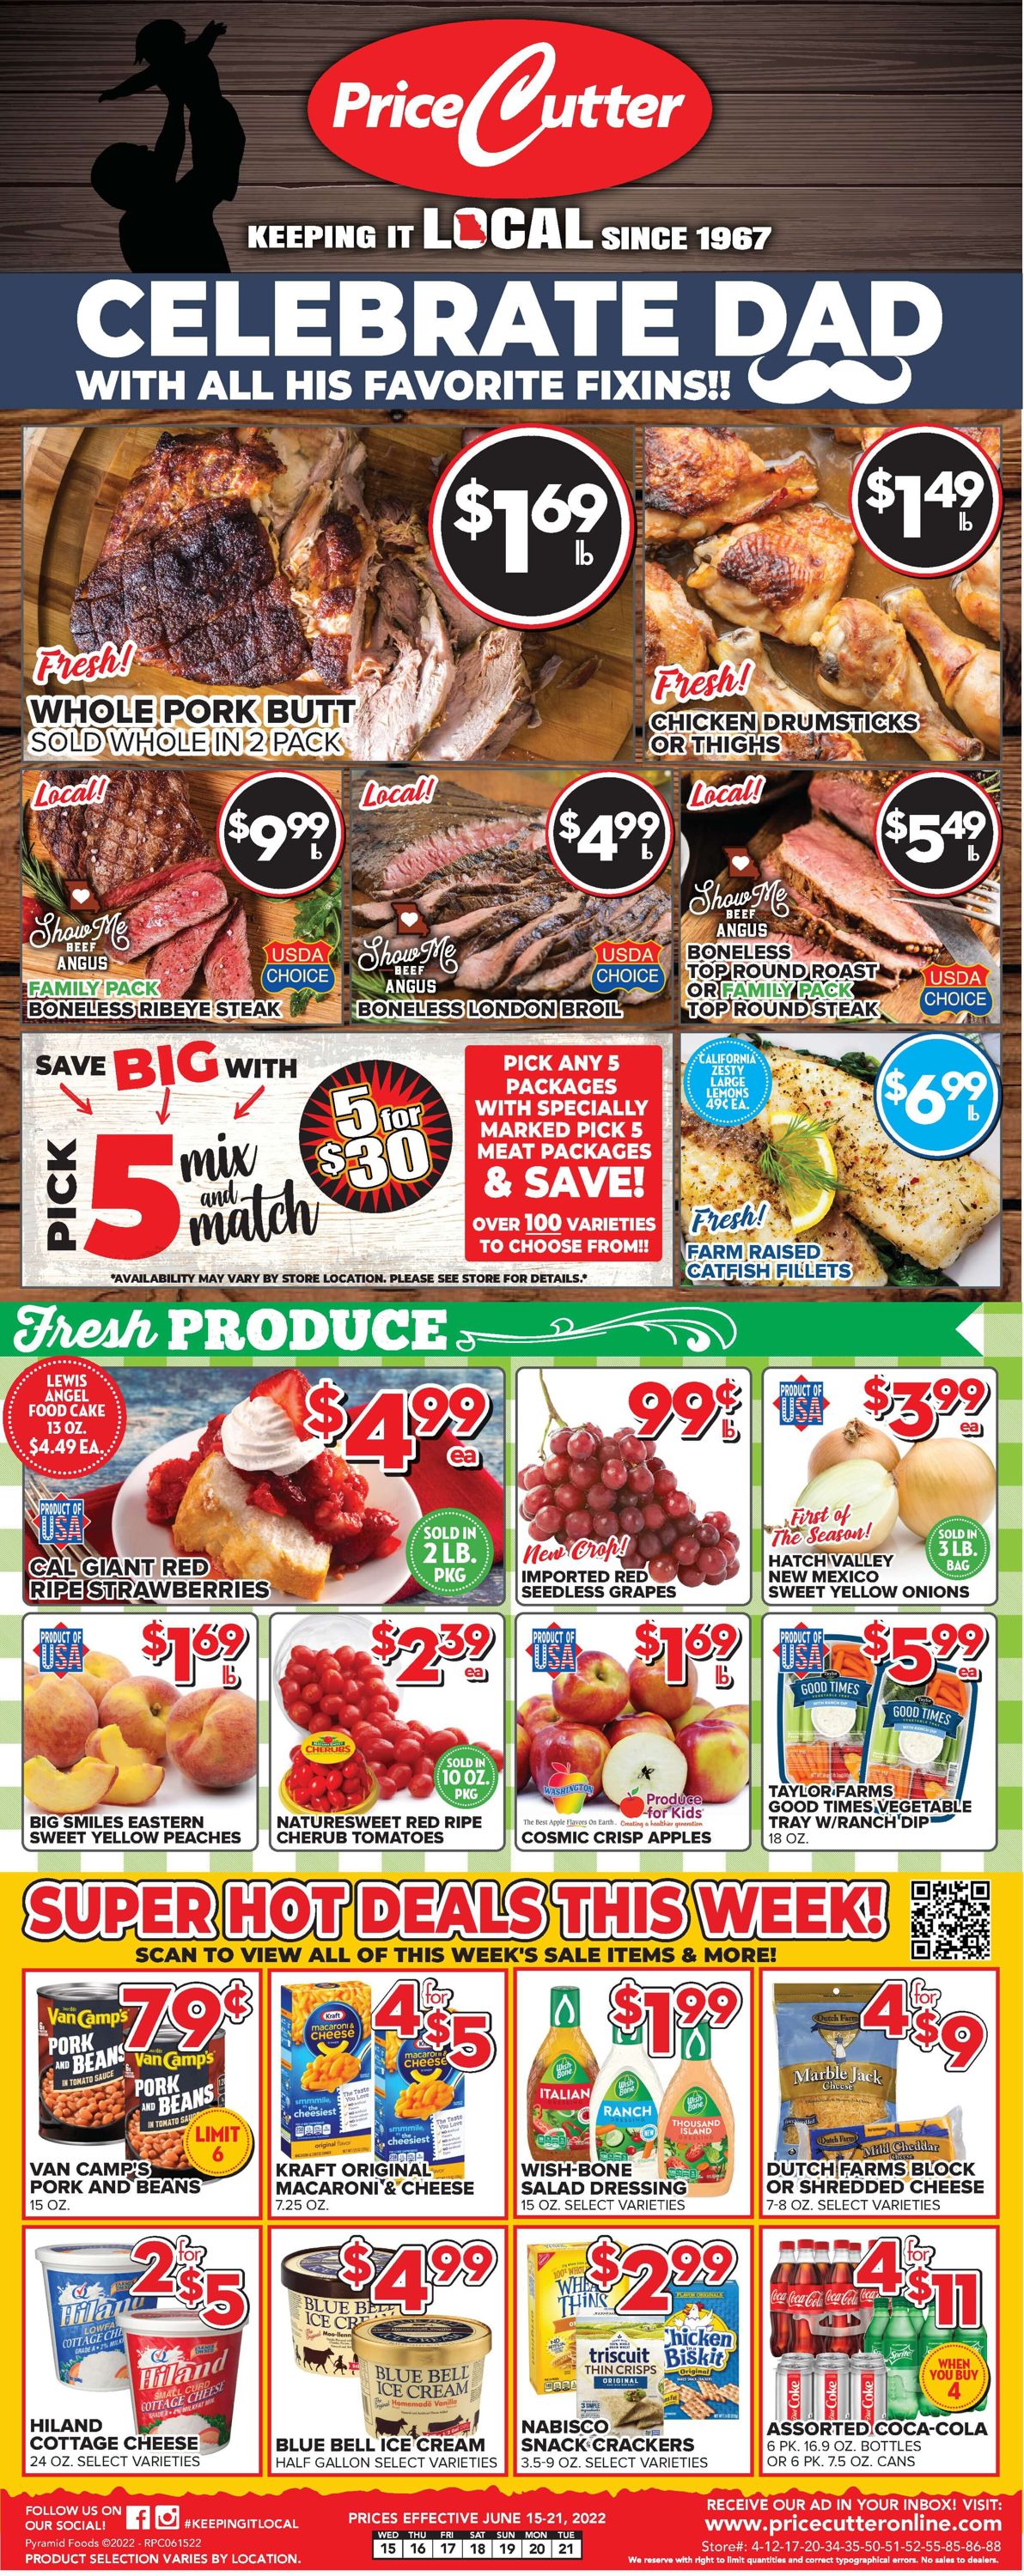 Price Cutter Weekly Ad Circular - valid 06/15-06/21/2022